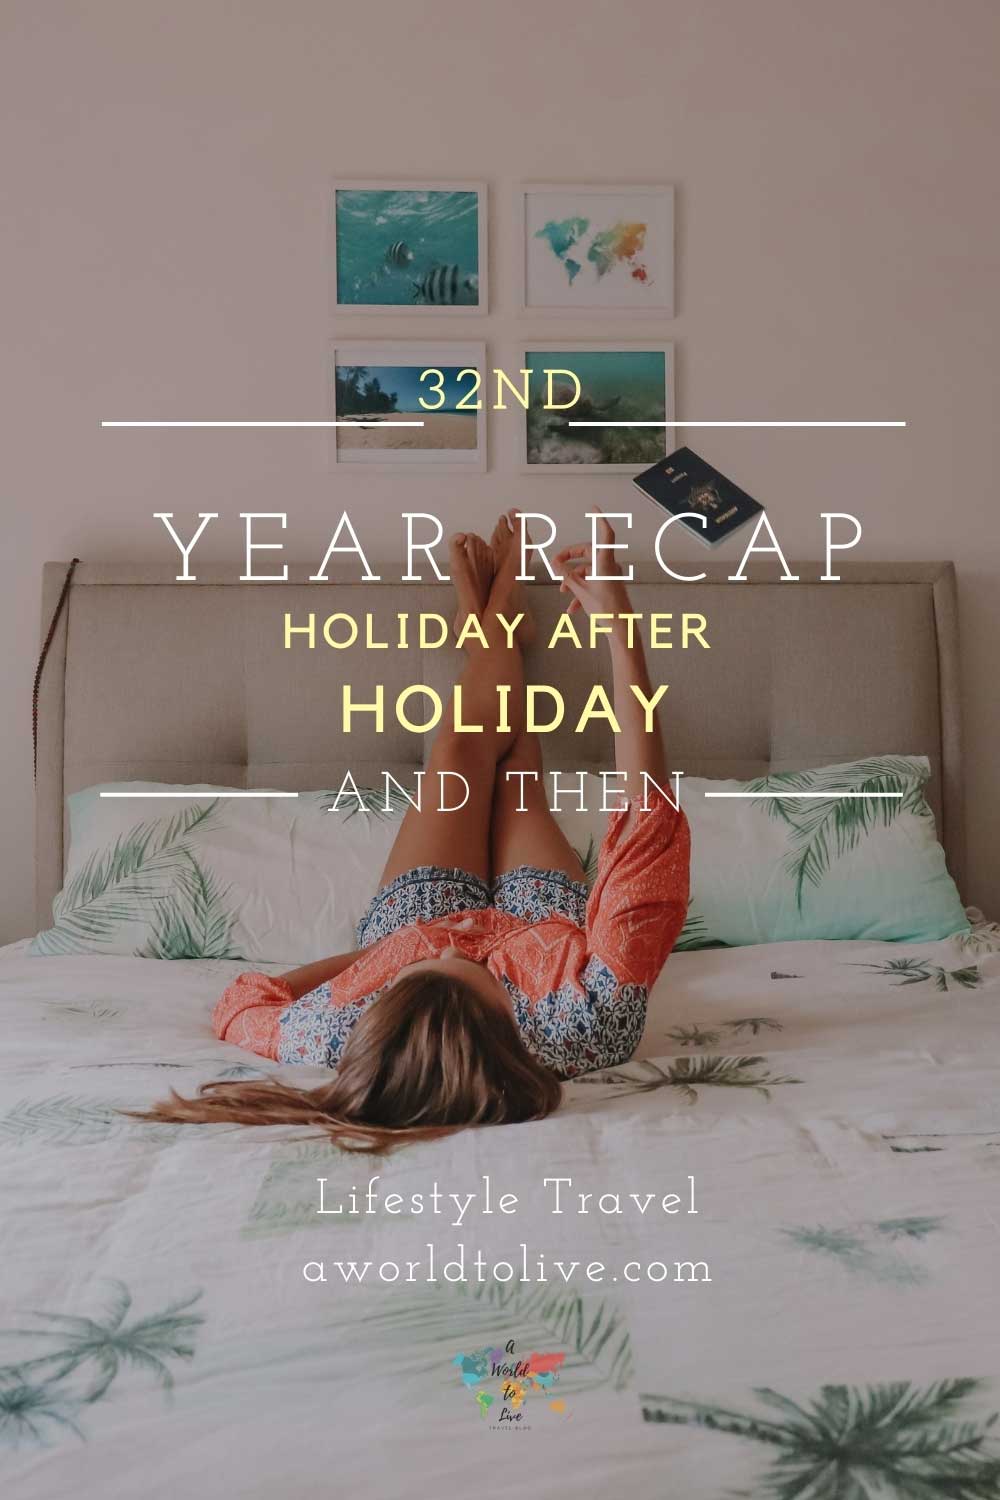 Elyse year recap of her 32nd year. Under the text there is a photo of her laying on the bed throwing her passport in the air